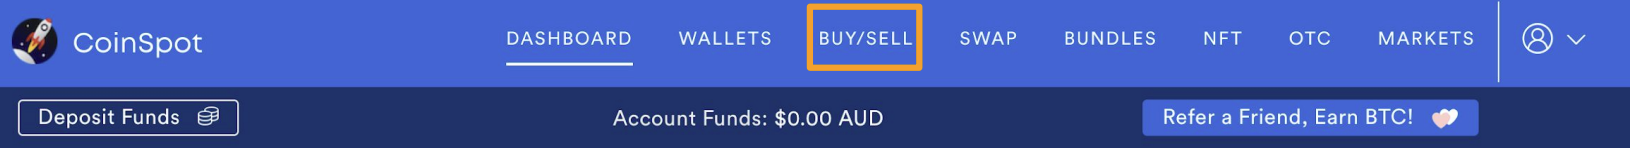 CoinSpot_Buy_and_Sell.png